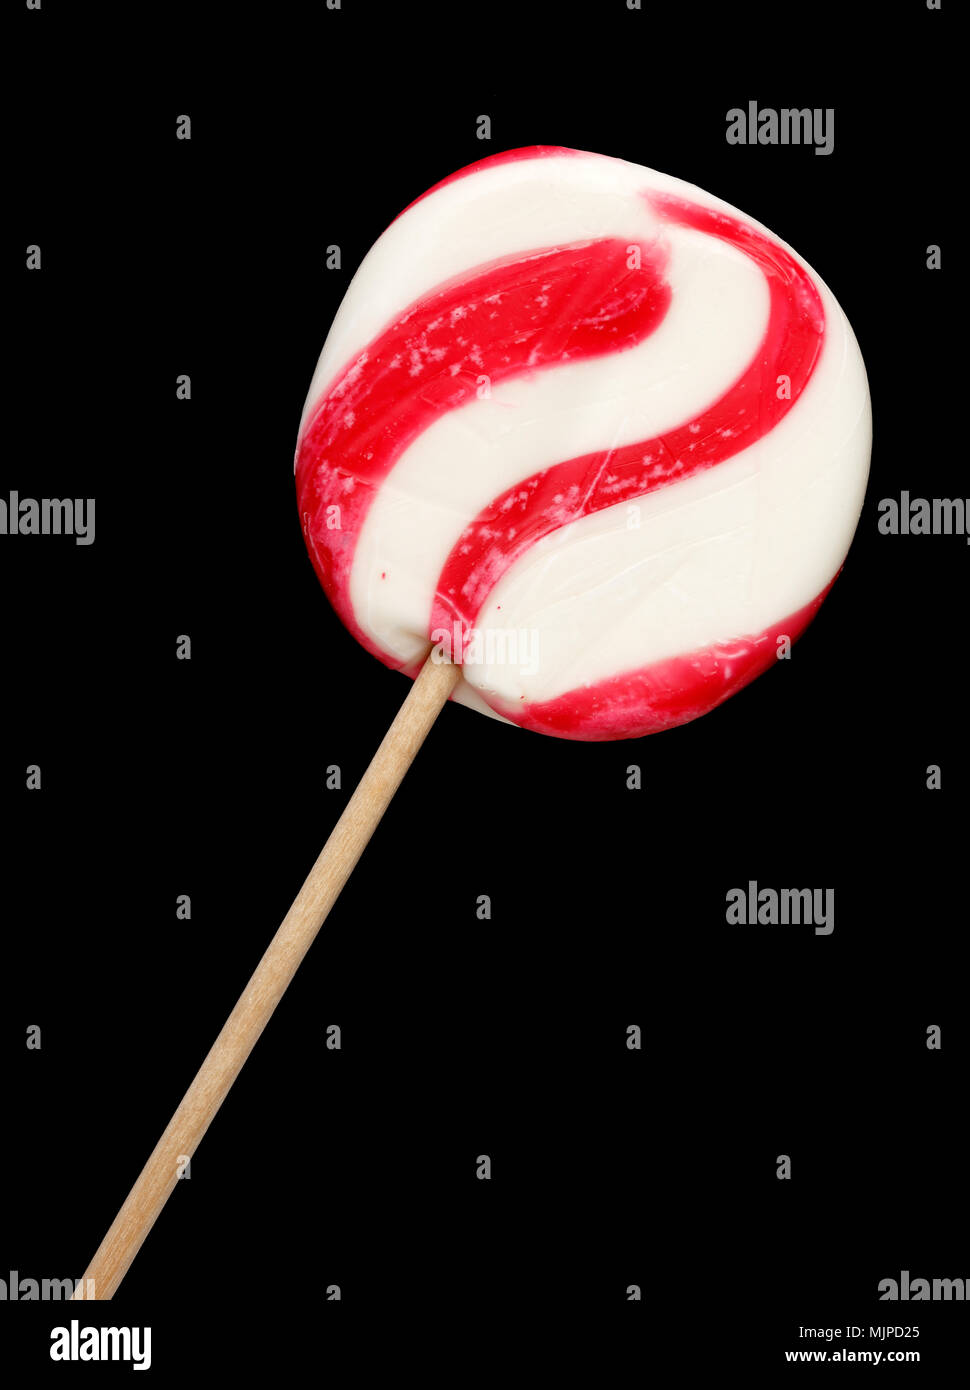 Candy cane lollipop isolated on black. Stock Photo